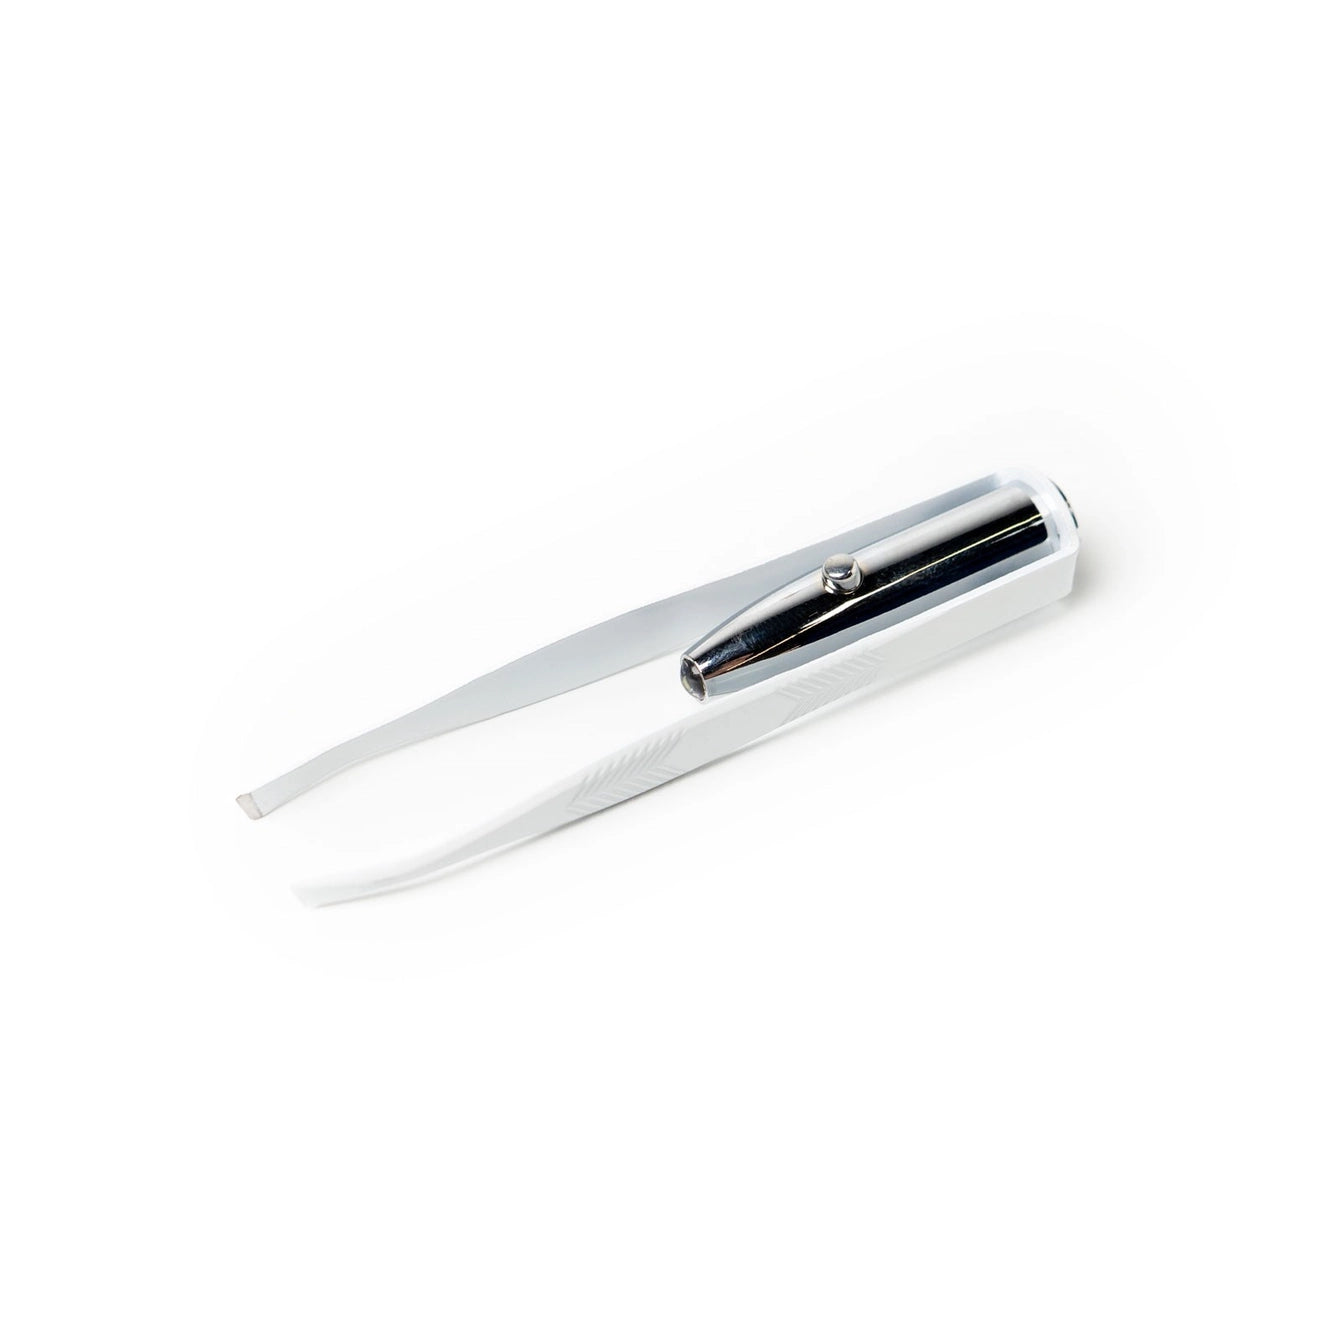 Precision grip tweezers t Targeted LED beam Easy & precise grooming Push button on/off Batteries included cloud color